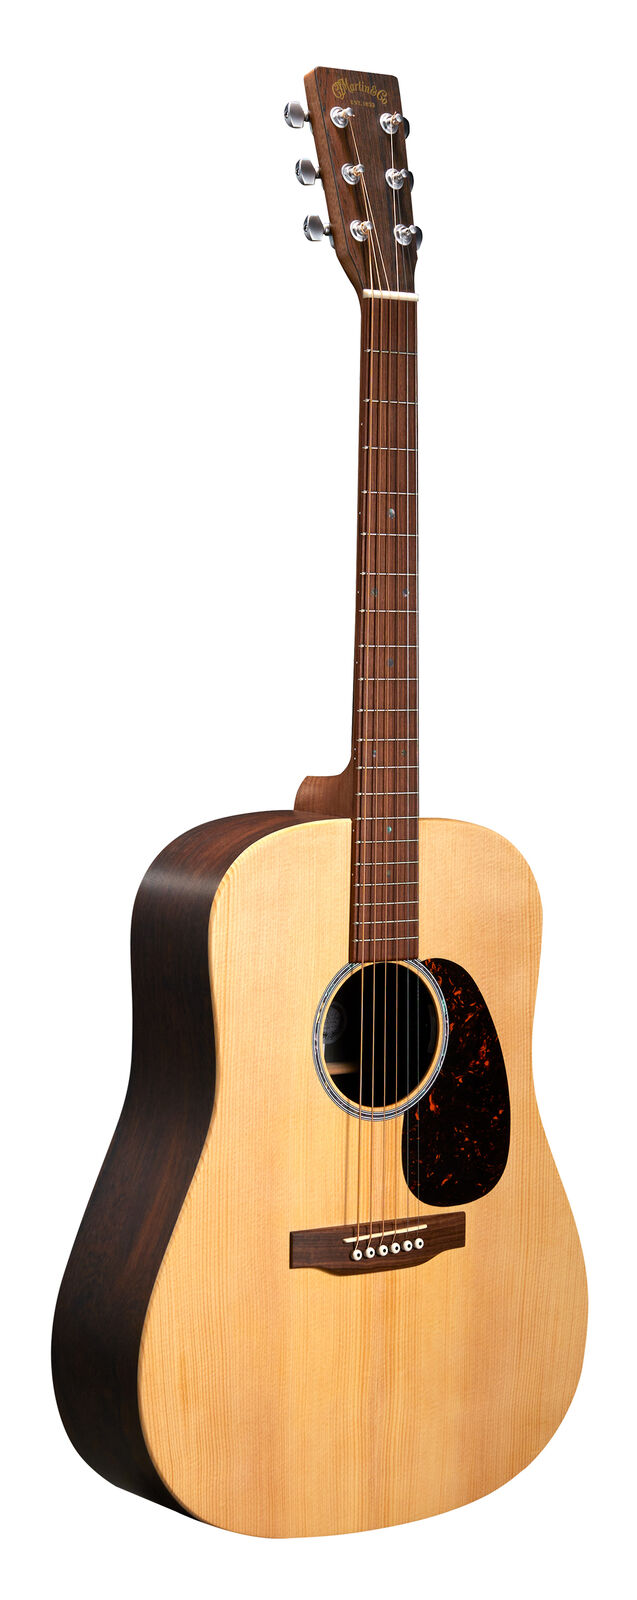 Martin D-X2E Spruce/Brazilian Rosewood HPL Dreadnought Electric-Acoustic Guitar with Gigbag